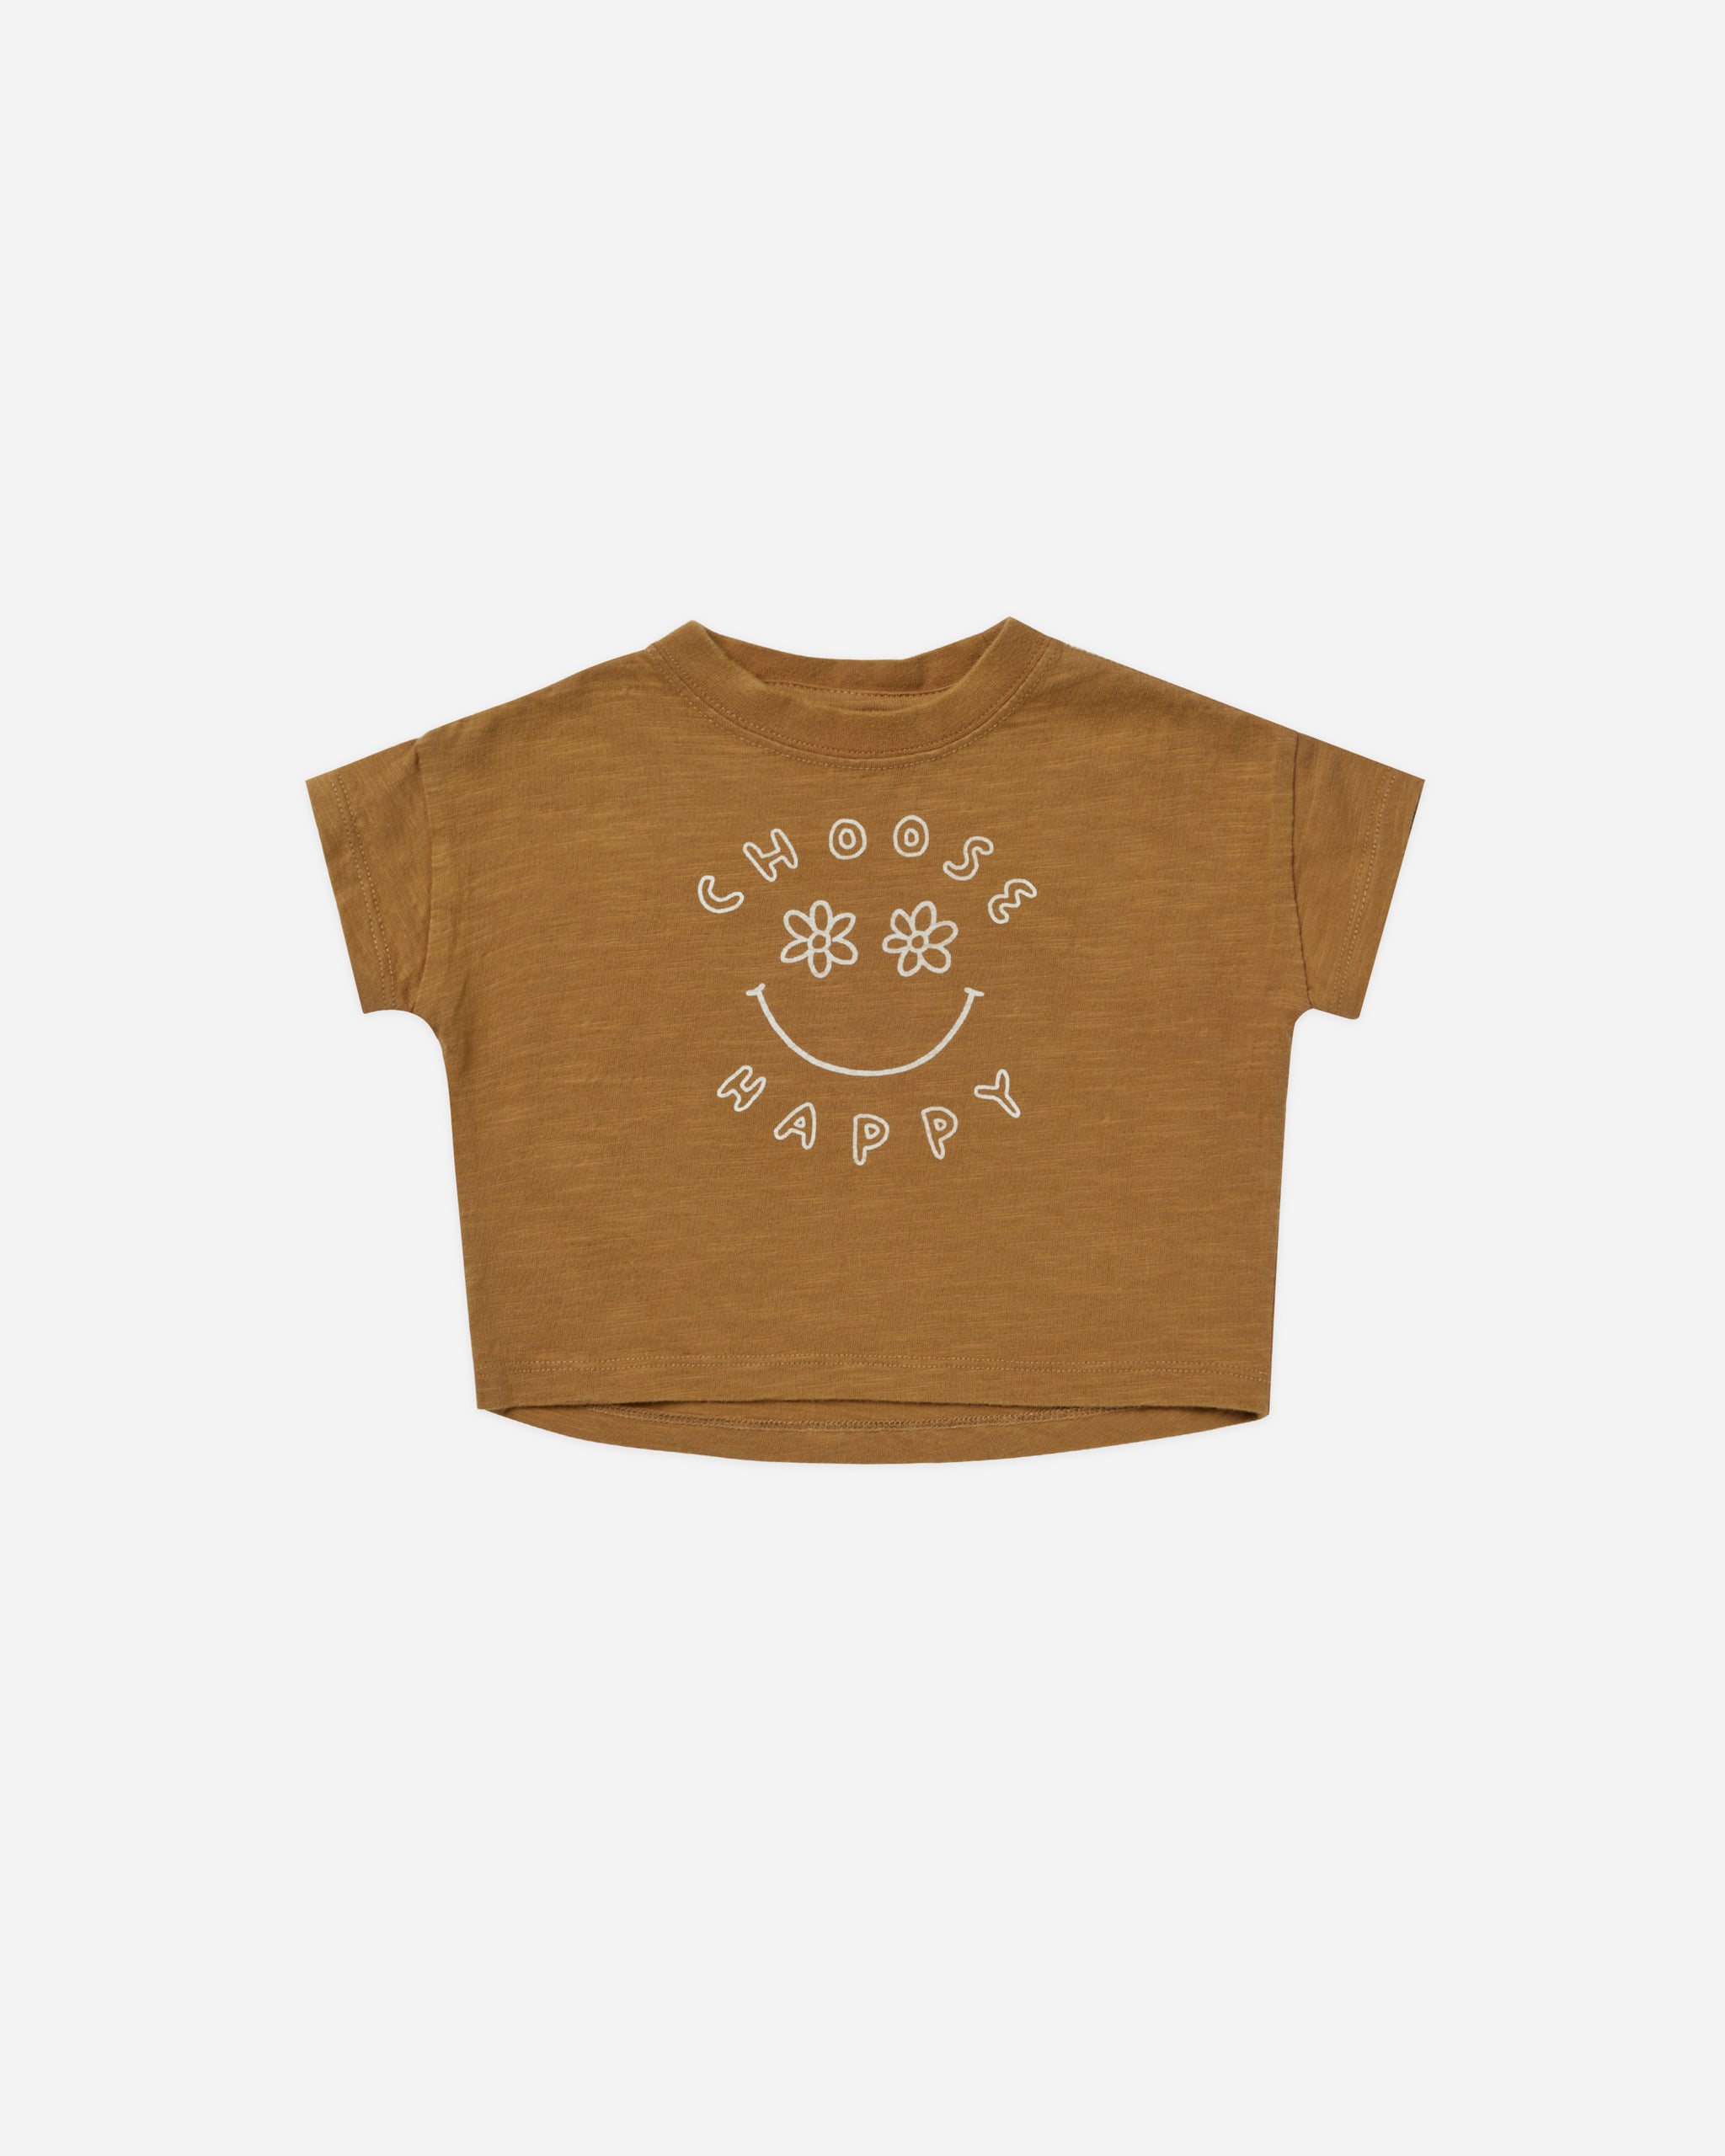 Boxy Tee || Choose Happy - Rylee + Cru | Kids Clothes | Trendy Baby Clothes | Modern Infant Outfits |